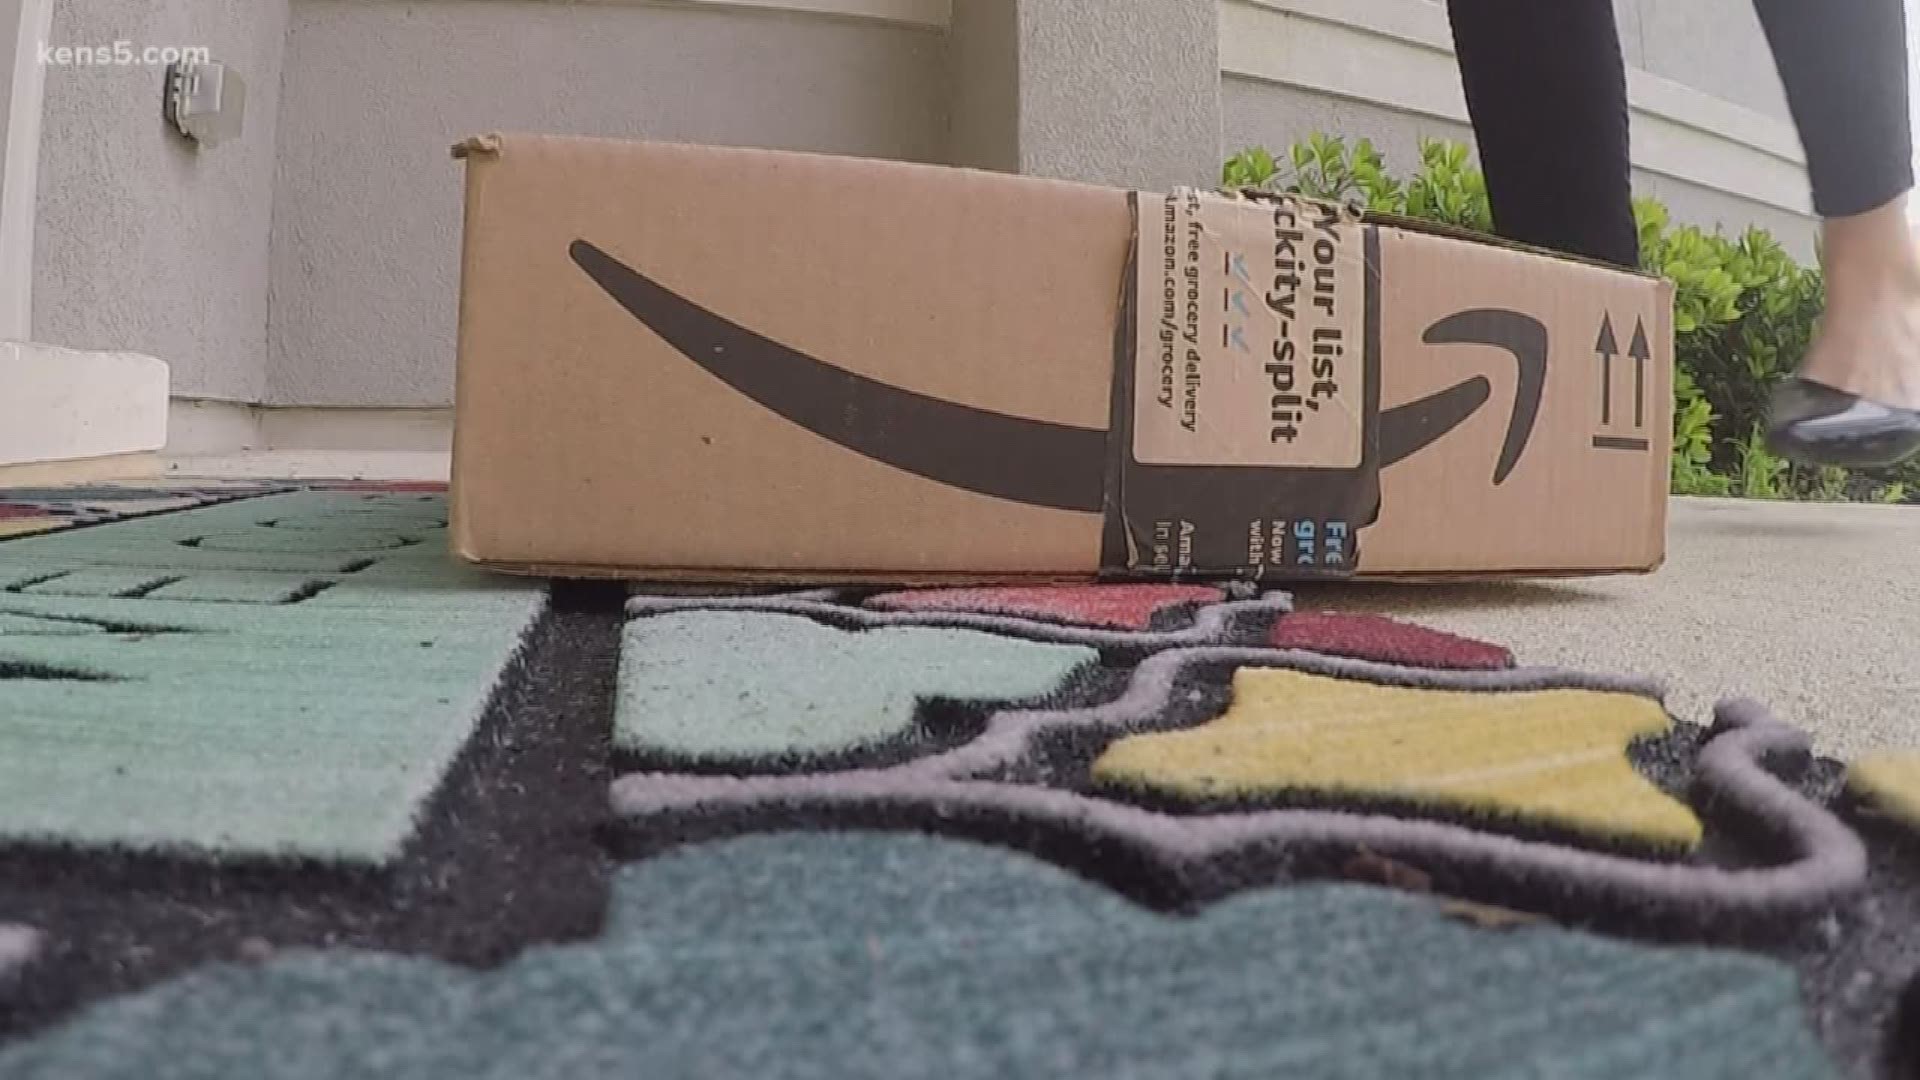 According to police, they aren't seeing any package theft trends across the city. But with all the online shopping going on, it's best to take precautions.